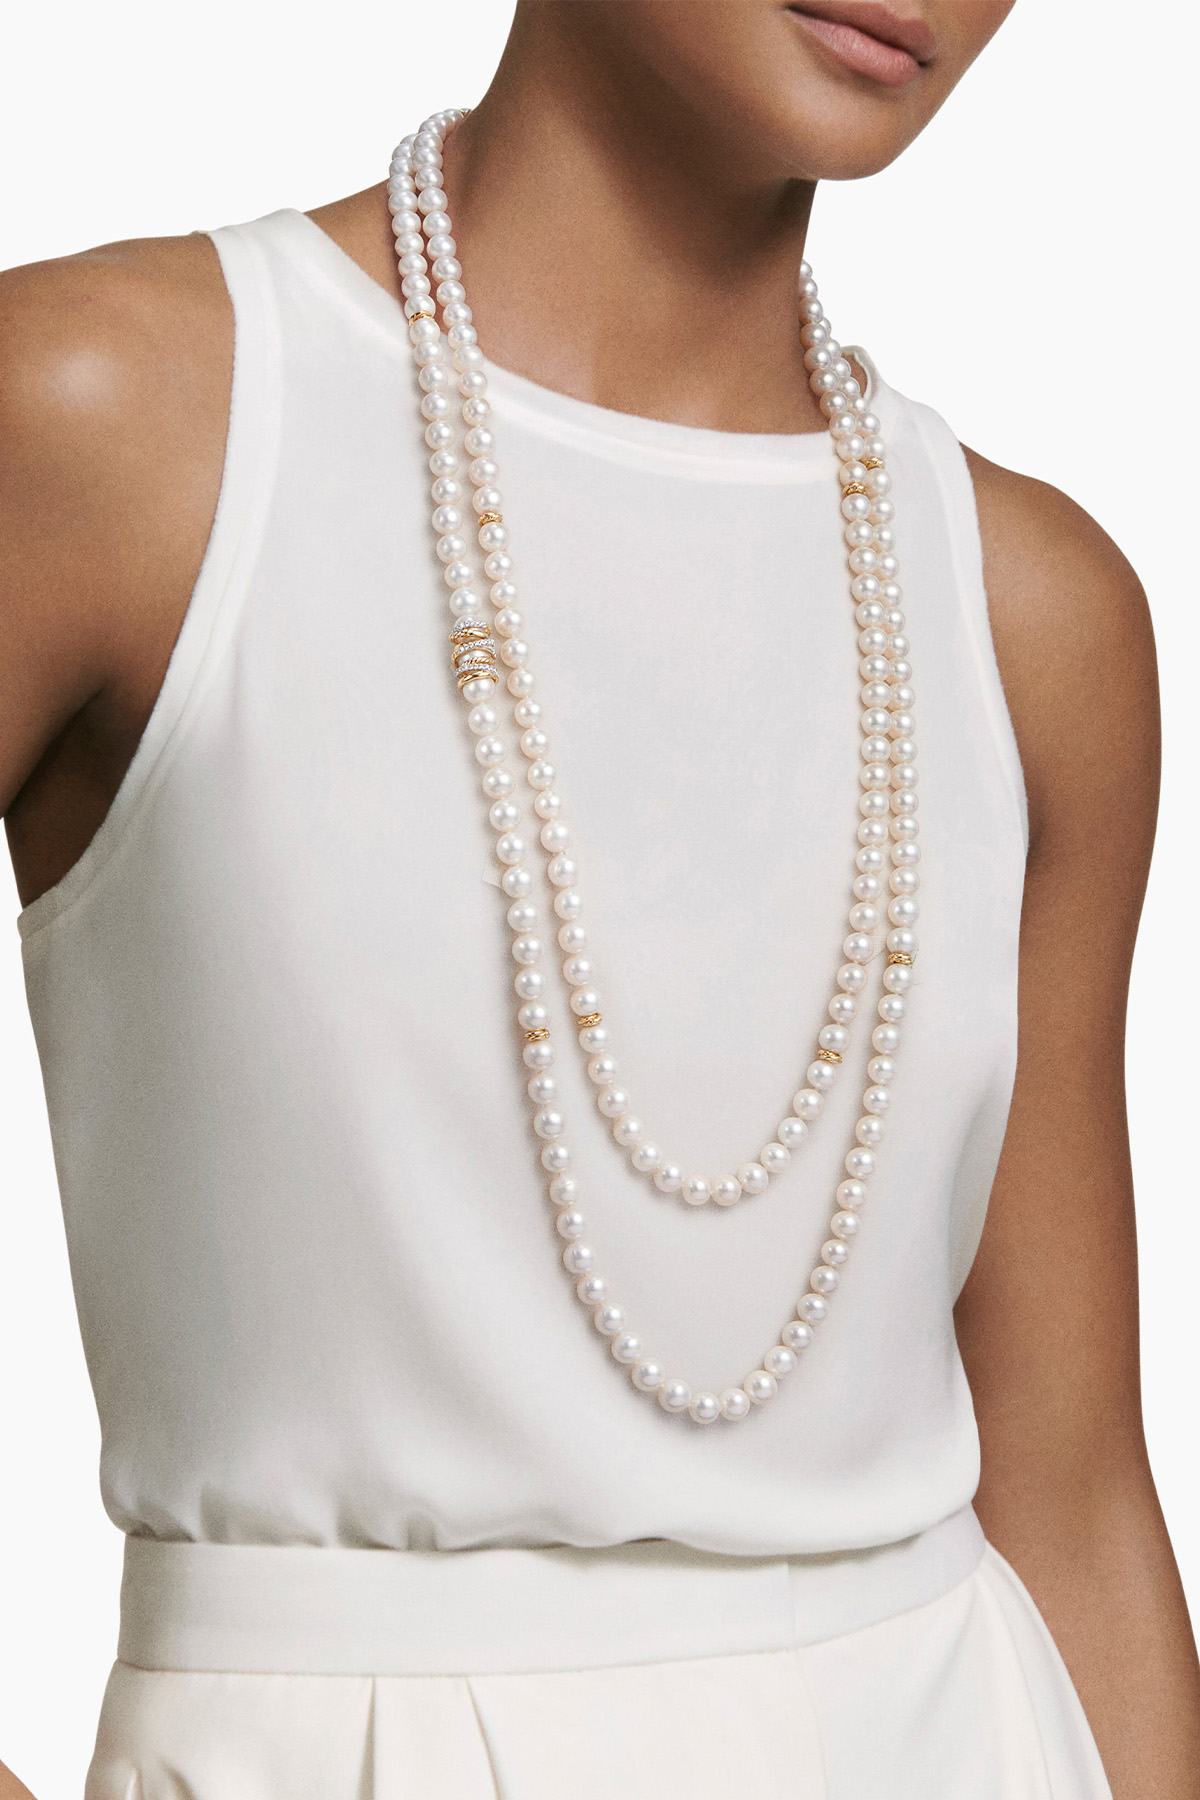 Helena Pearl Strand Necklace in 18k Yellow Gold With Pearls and Diamonds, 9mm